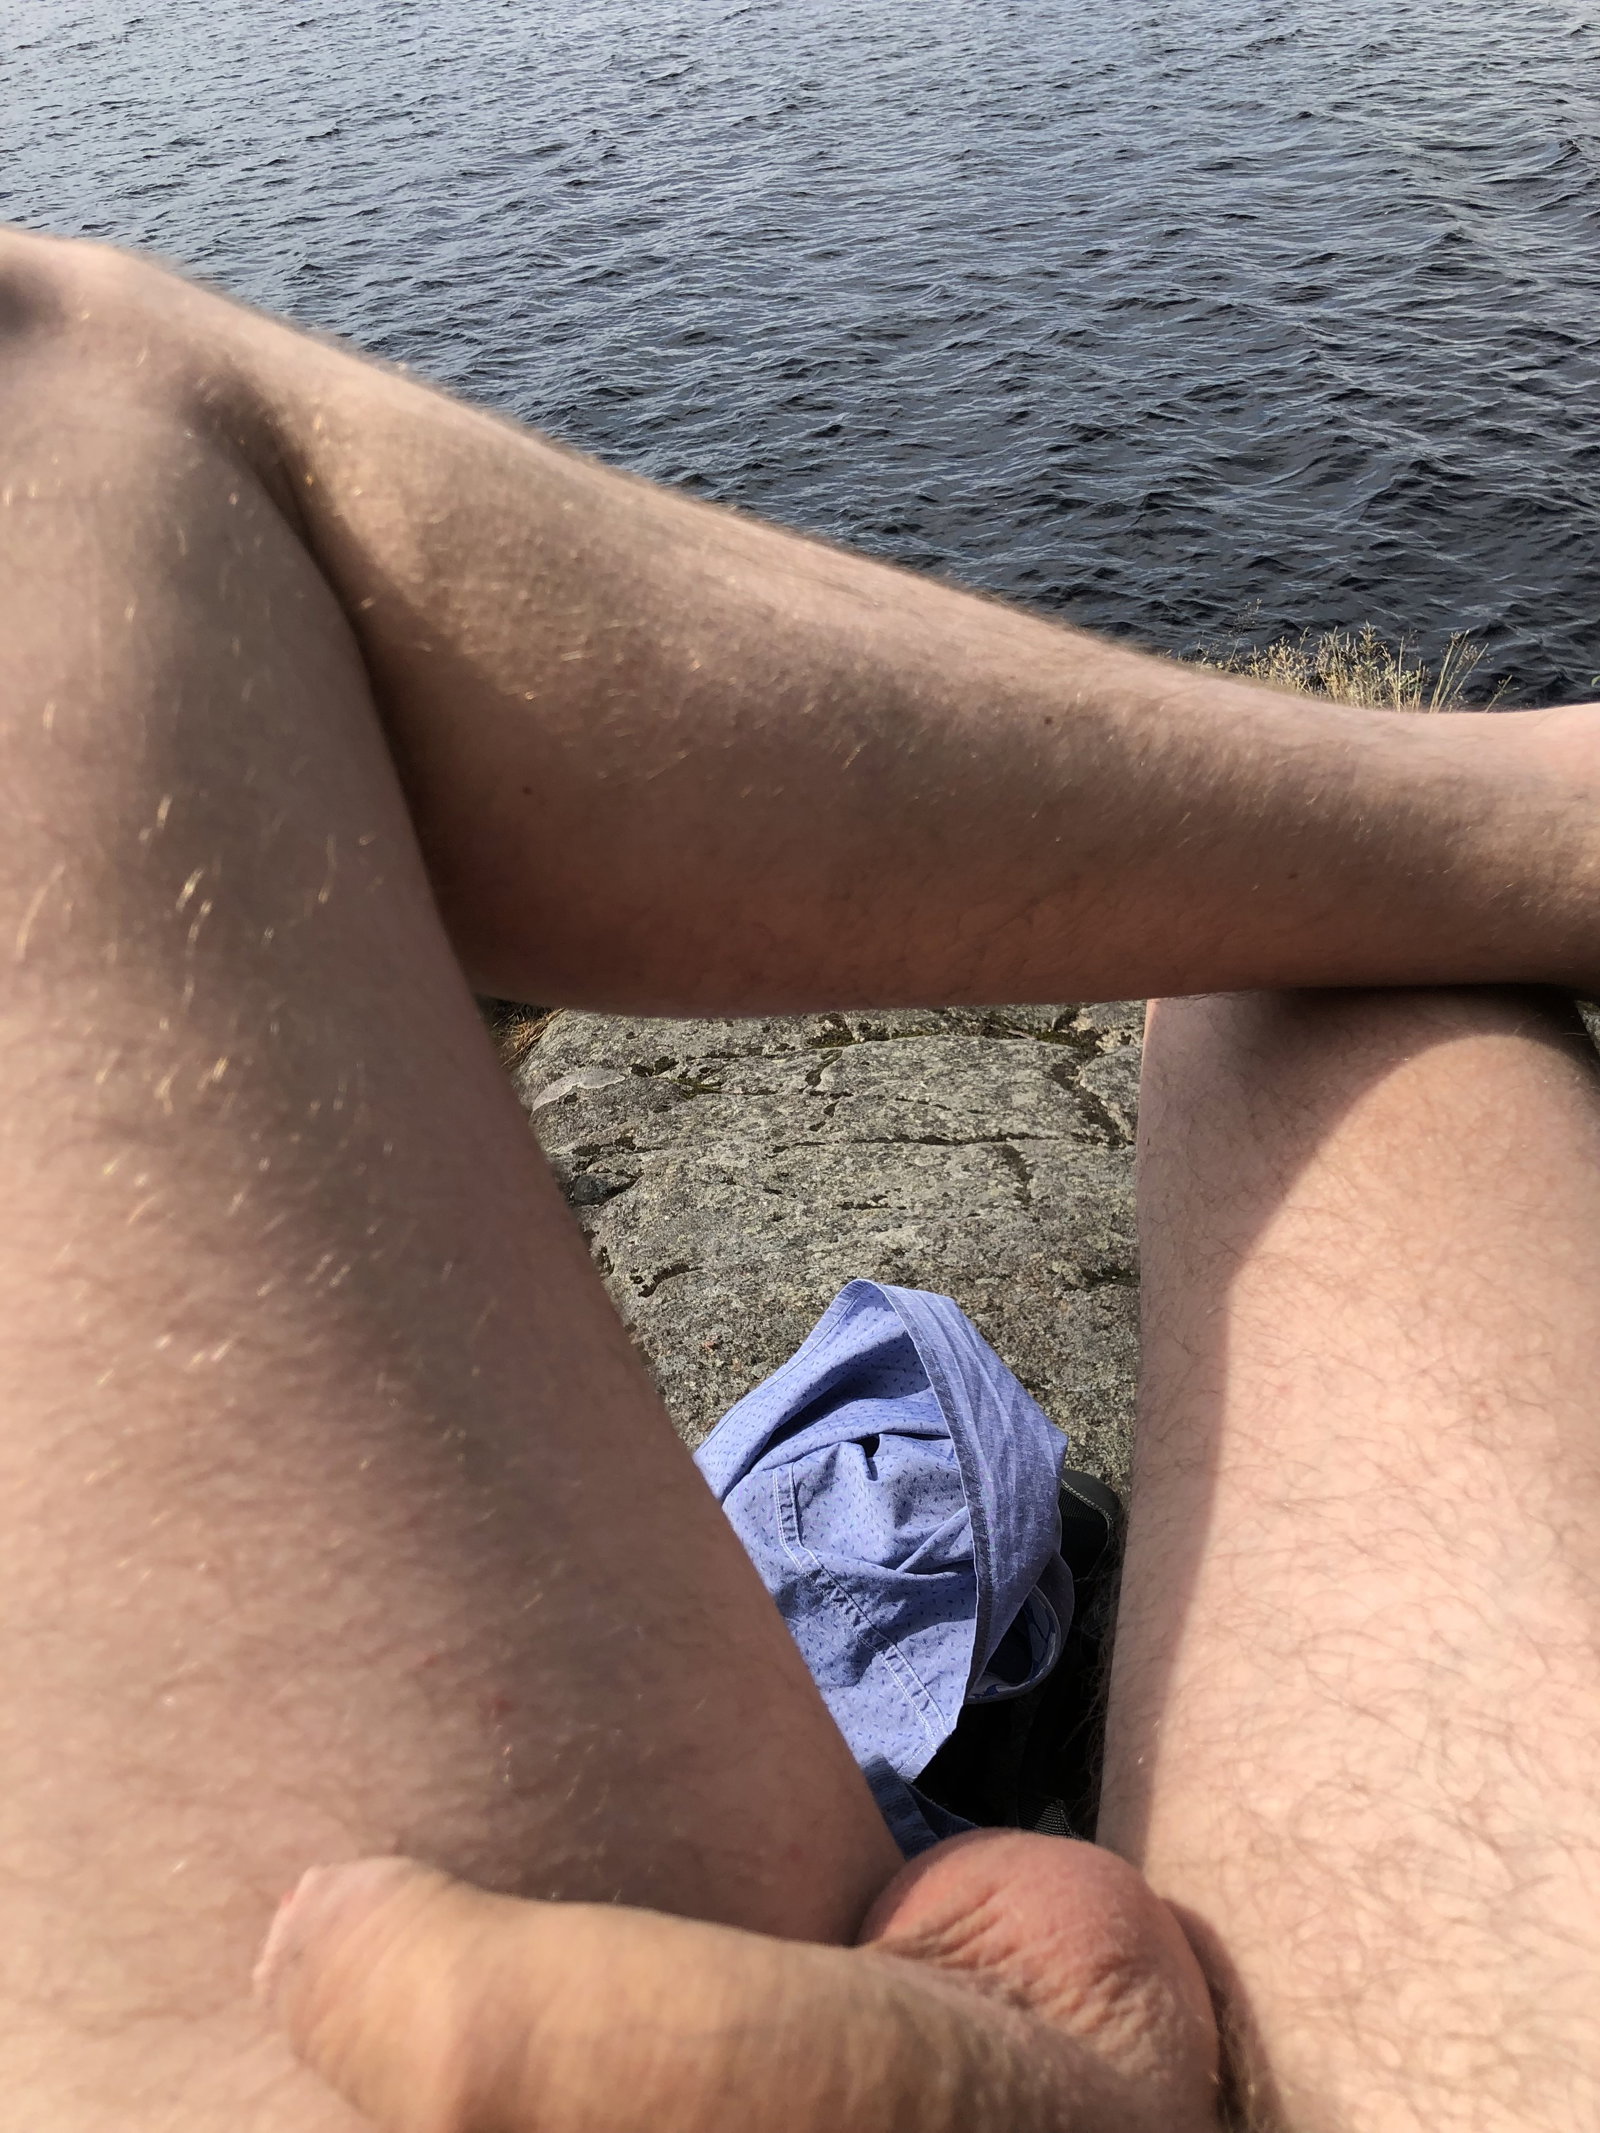 Photo by Bakk with the username @Bakk, who is a verified user,  July 19, 2019 at 1:37 PM. The post is about the topic Uncut cocks and the text says 'A trip to the lake'